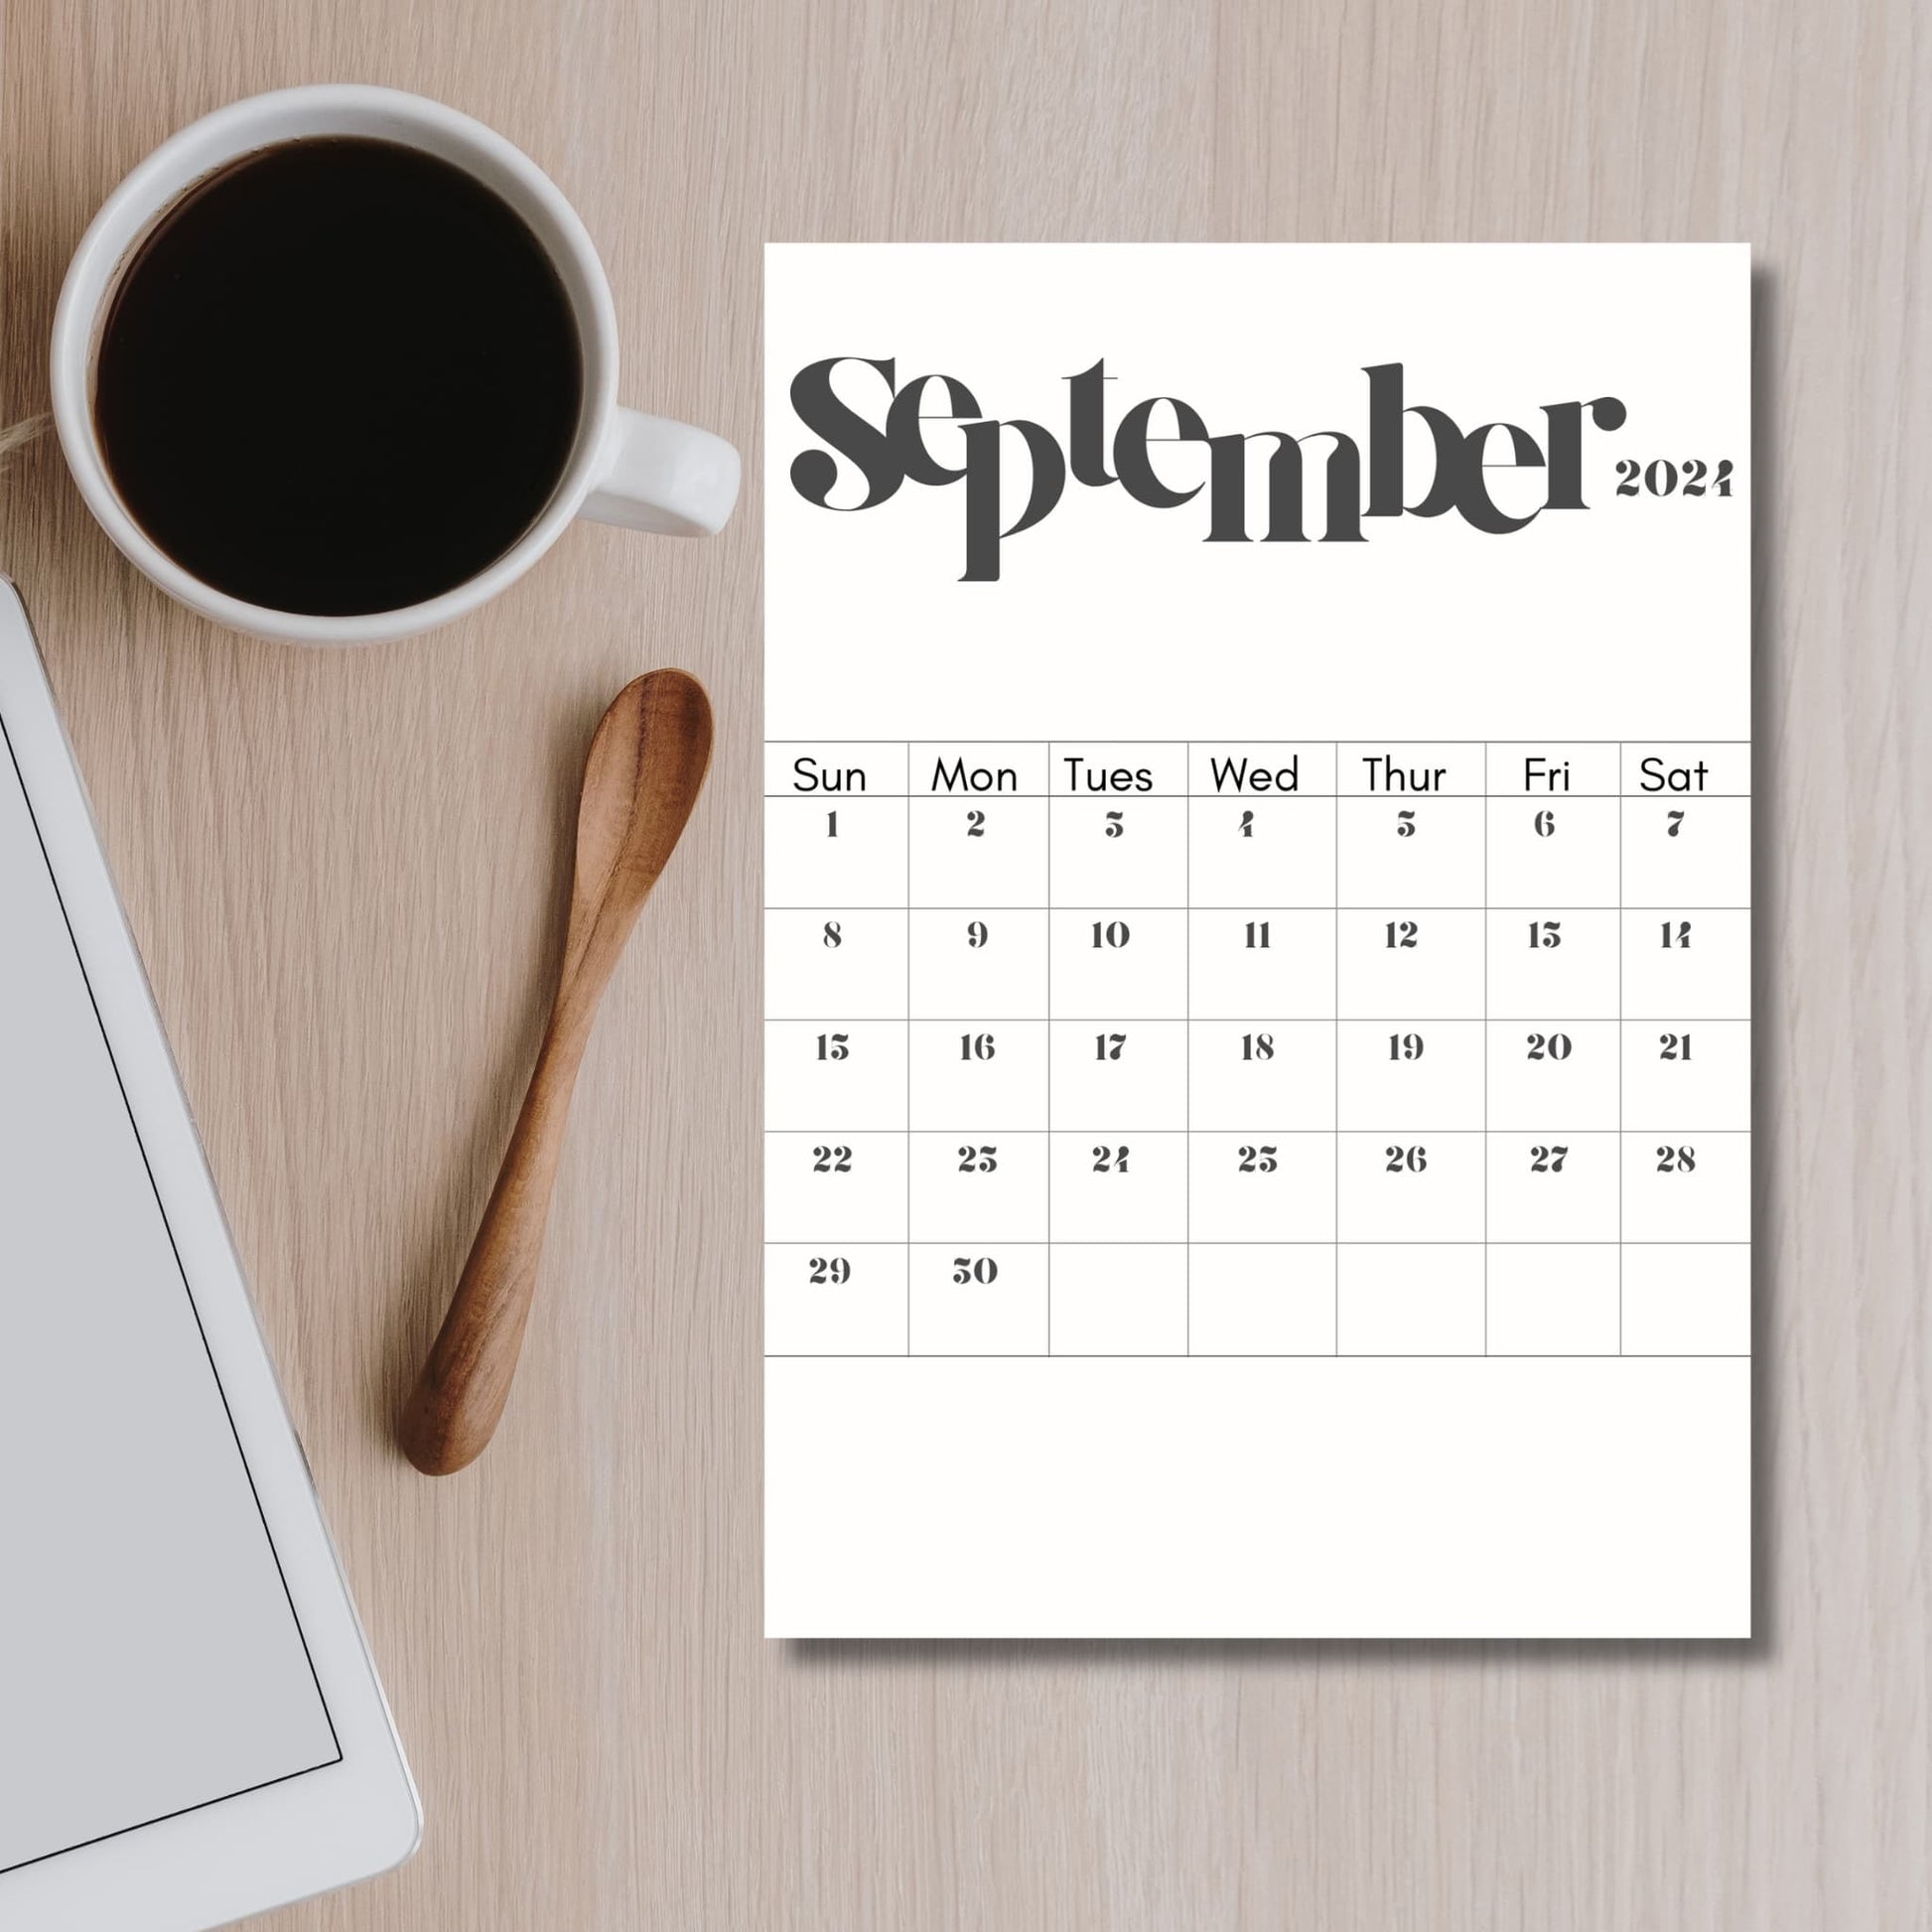 2024 September calendar print on brown table with coffee cup and spoon